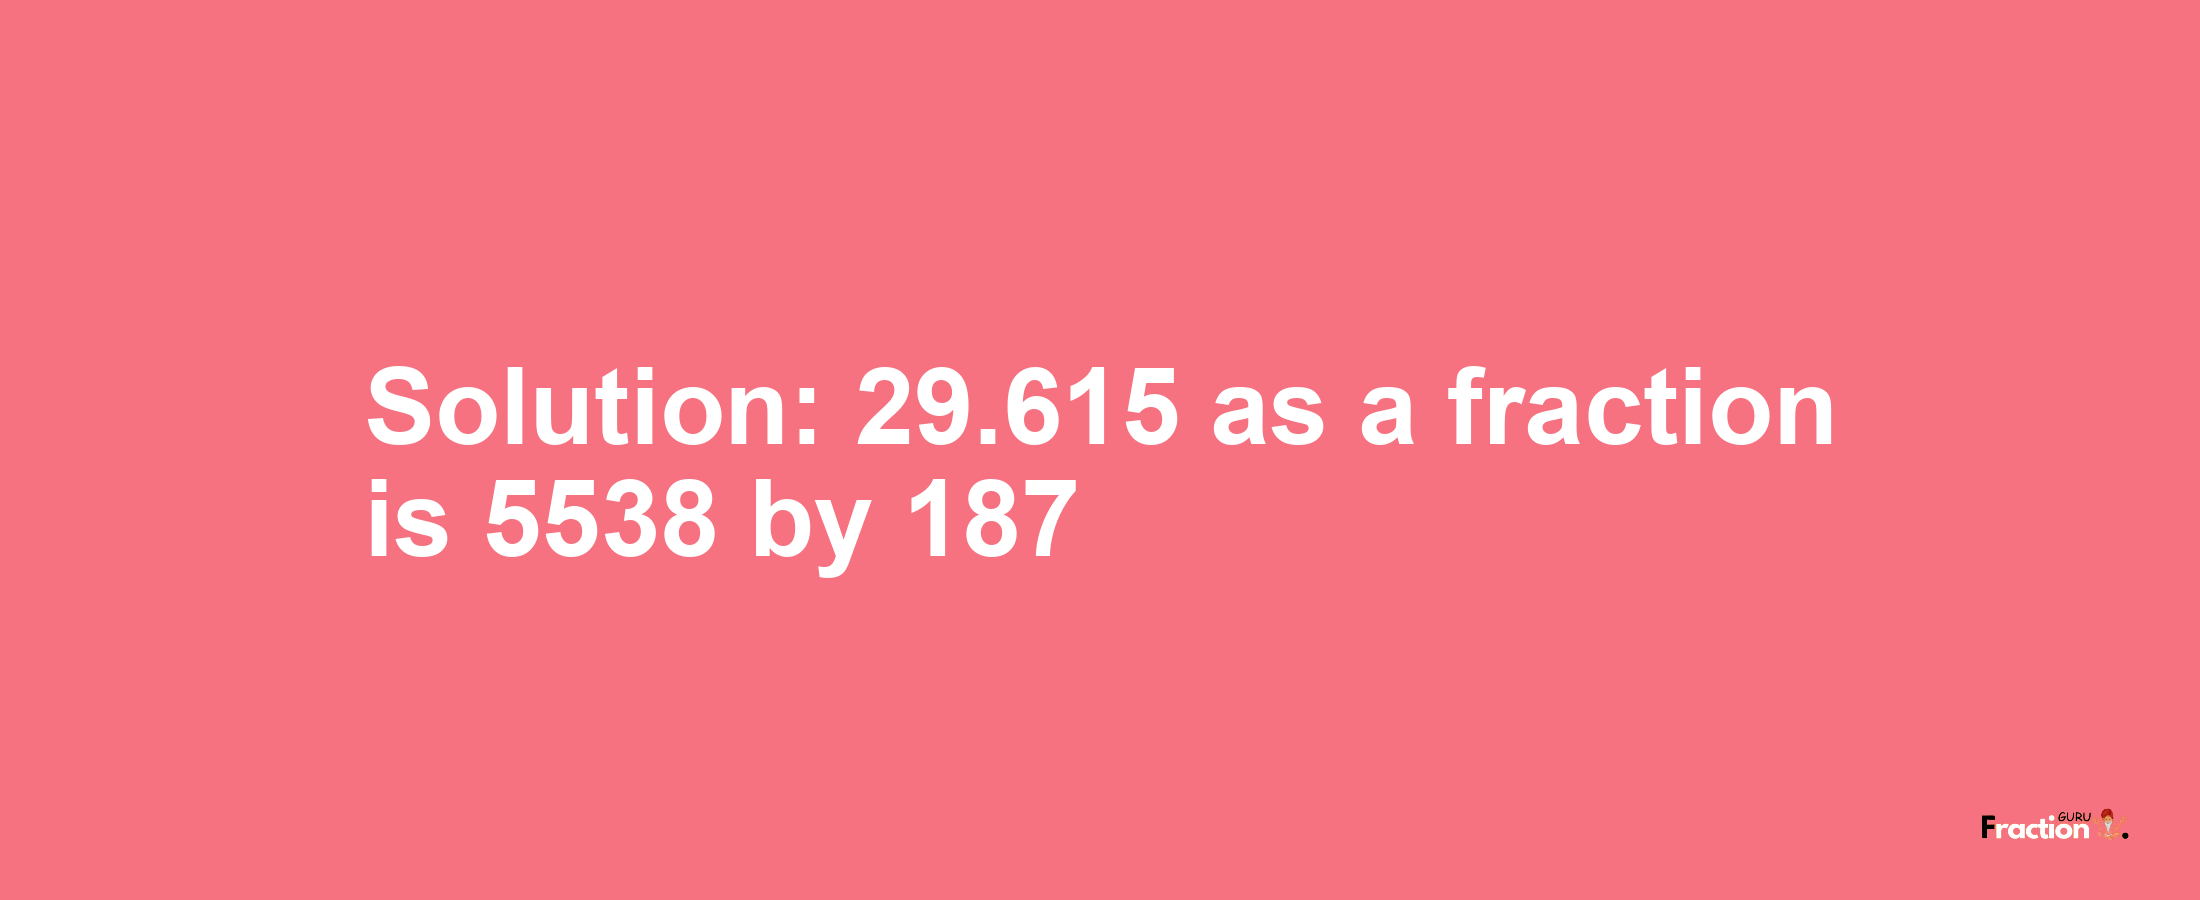 Solution:29.615 as a fraction is 5538/187